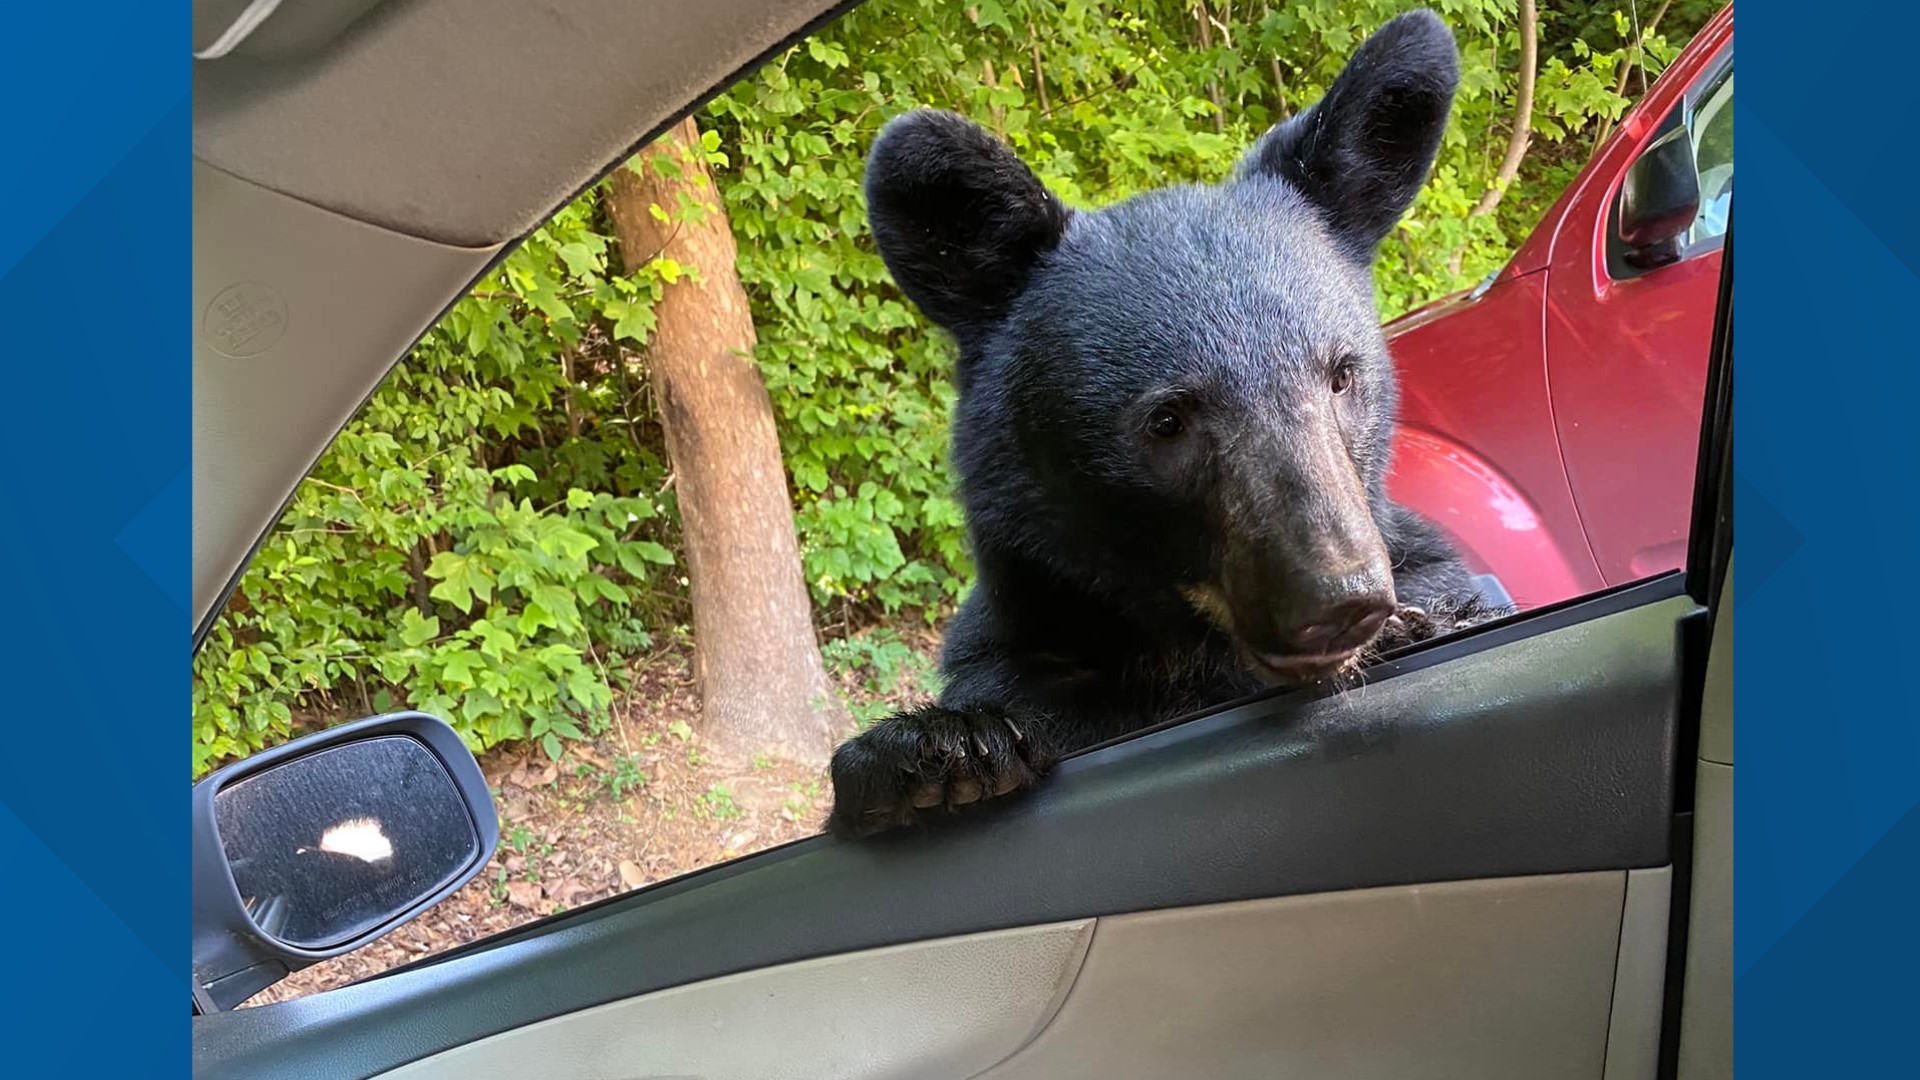 Bear encounters are a fact of life in the Smokies, but that doesn't mean you should take these wild animals lightly. If you see a bear, you need to stay BearWise.